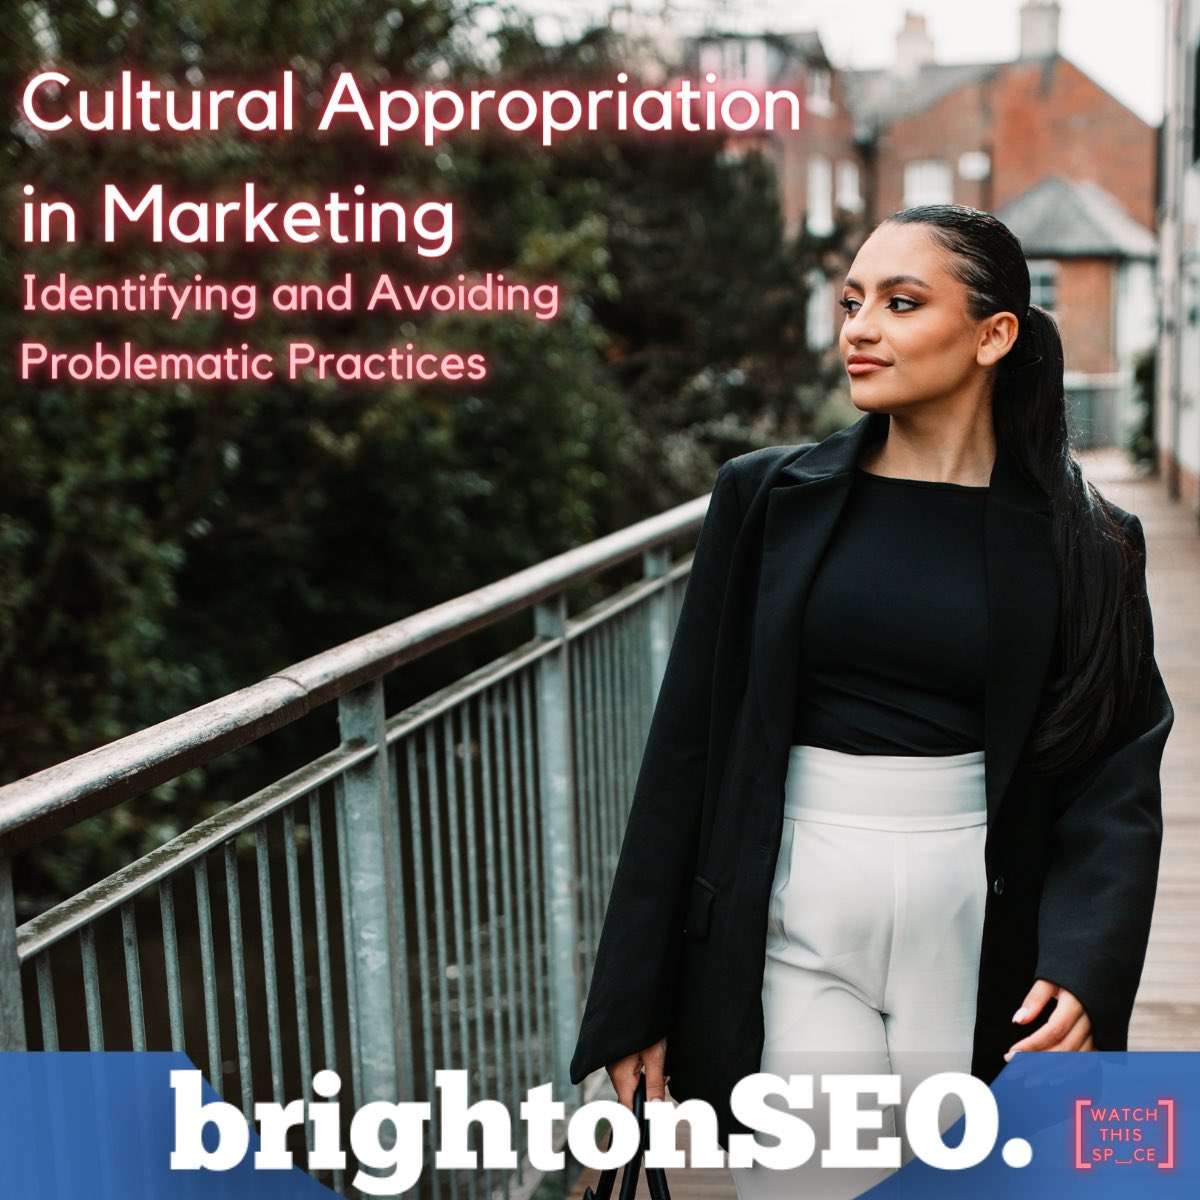 Officially a speaker at #brightonSEO 😍

I'll be talking about #CulturalAppropriation in Marketing and how you can identify and avoid problematic practices at the Online PR Show fringe conference on Wednesday 13th September.

Grab your tickets here 👉🏽 brightonseo.com/register